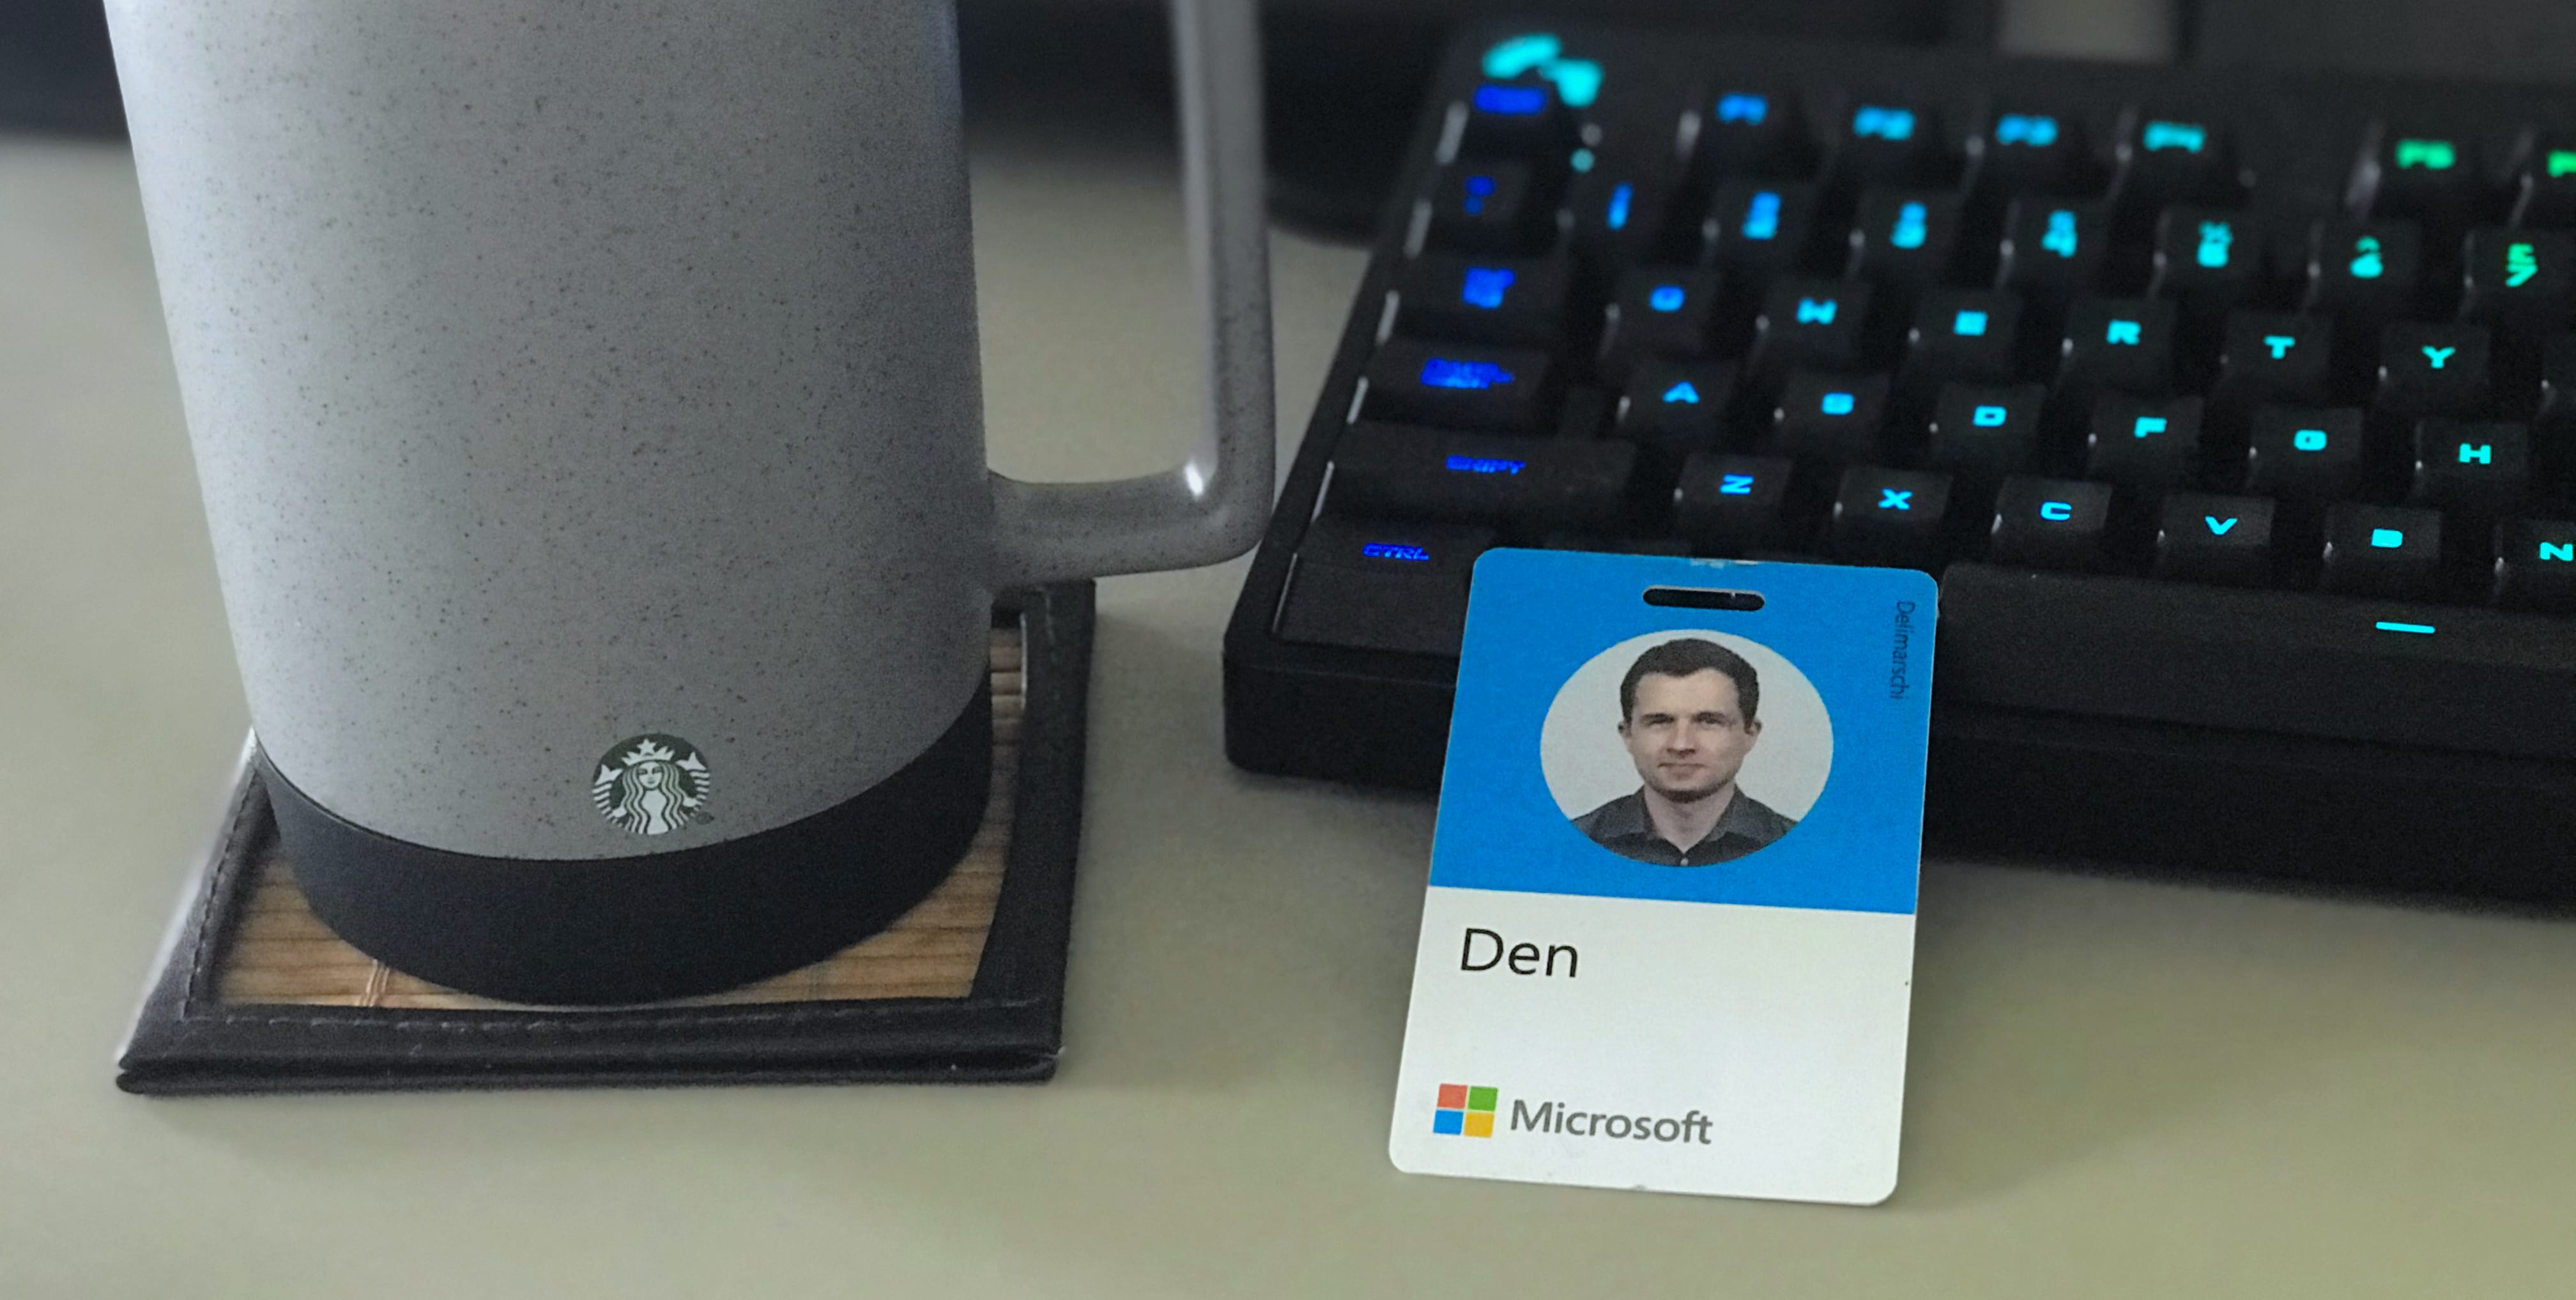 Microsoft badge next to a coffee cup and a keyboard